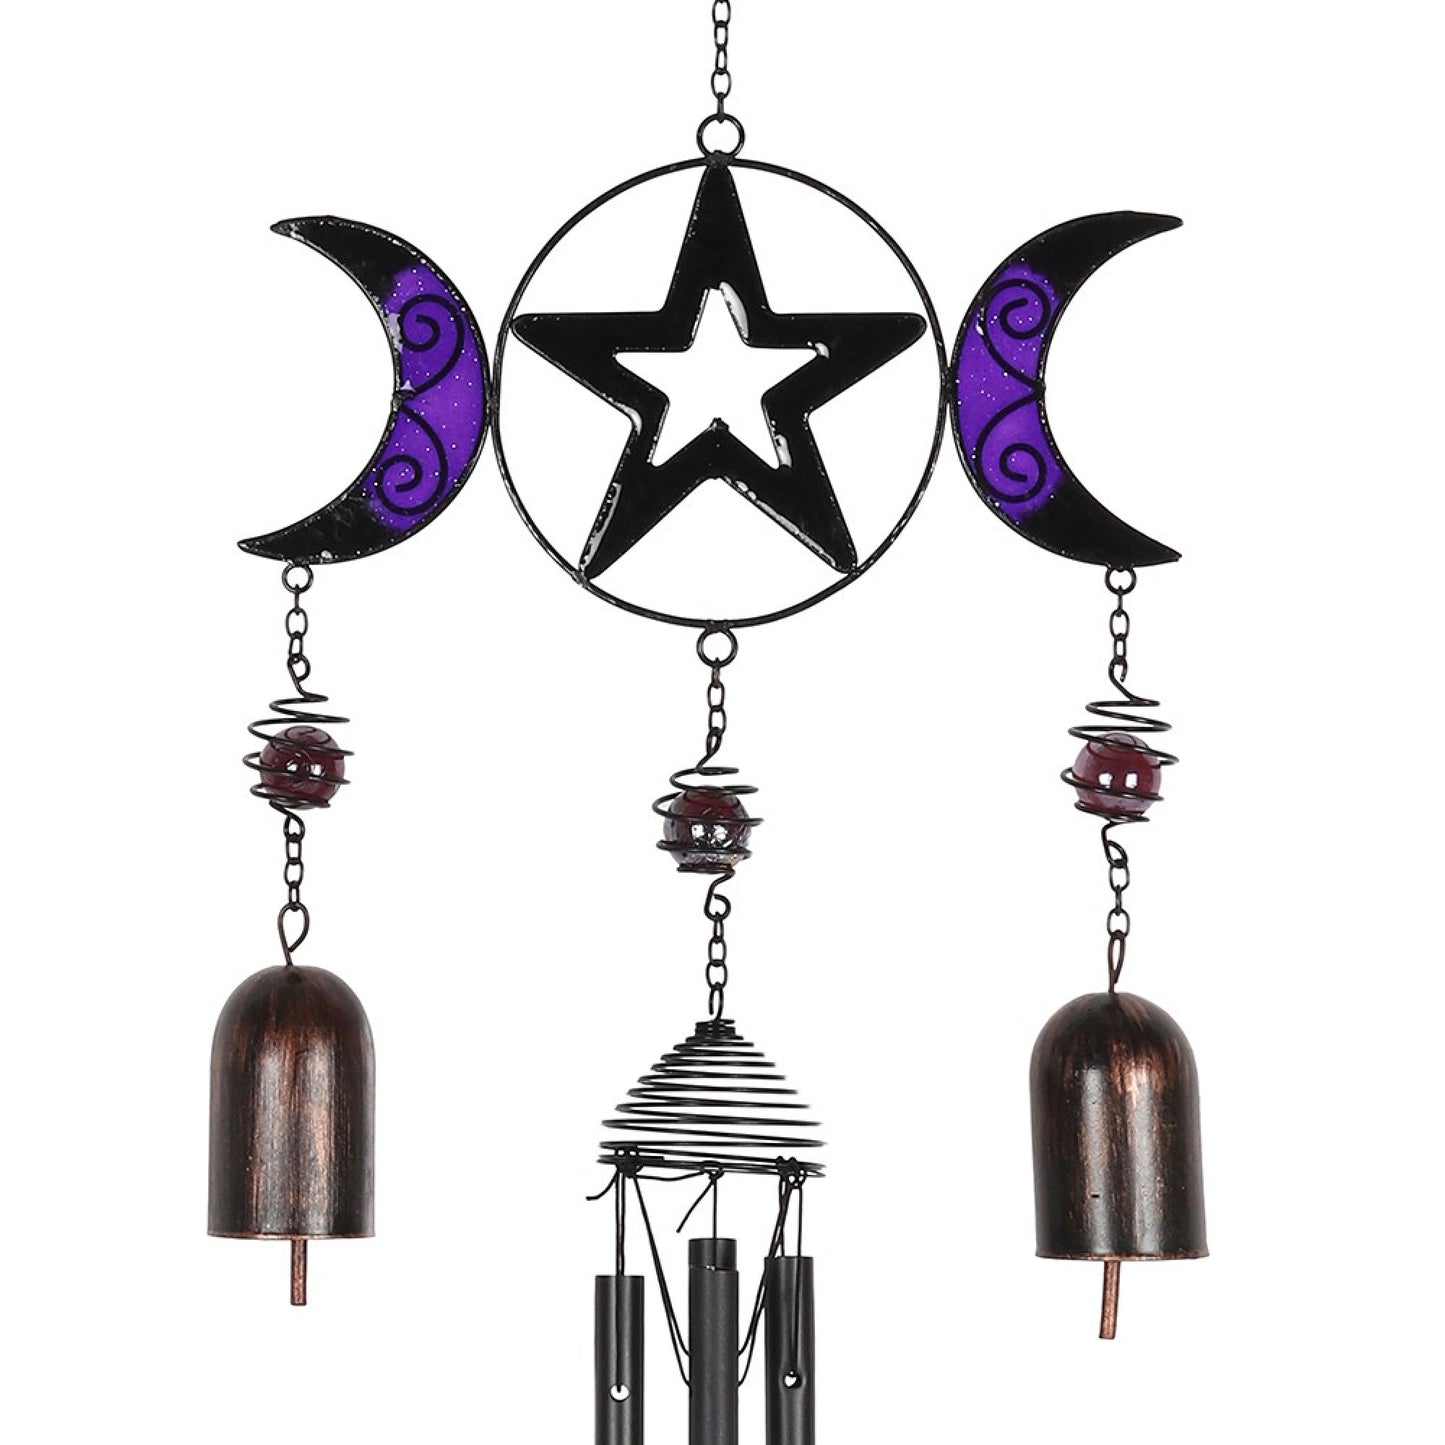 Triple Moon Wind Chime with Bells